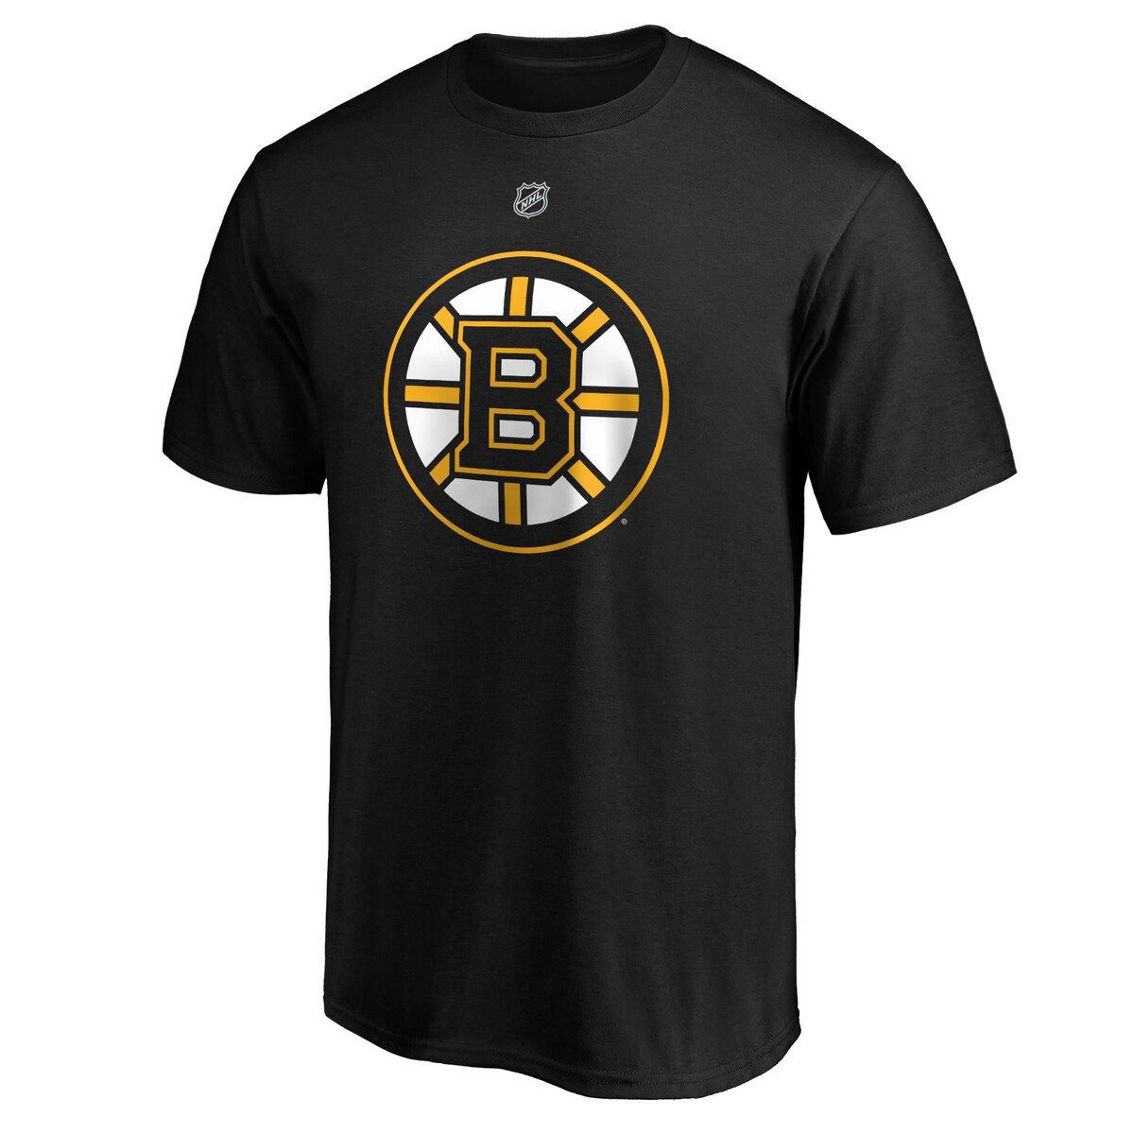 Fanatics Branded Men's Brad Marchand Black Boston Bruins Team Authentic Stack Name & Number T-Shirt - Image 3 of 4